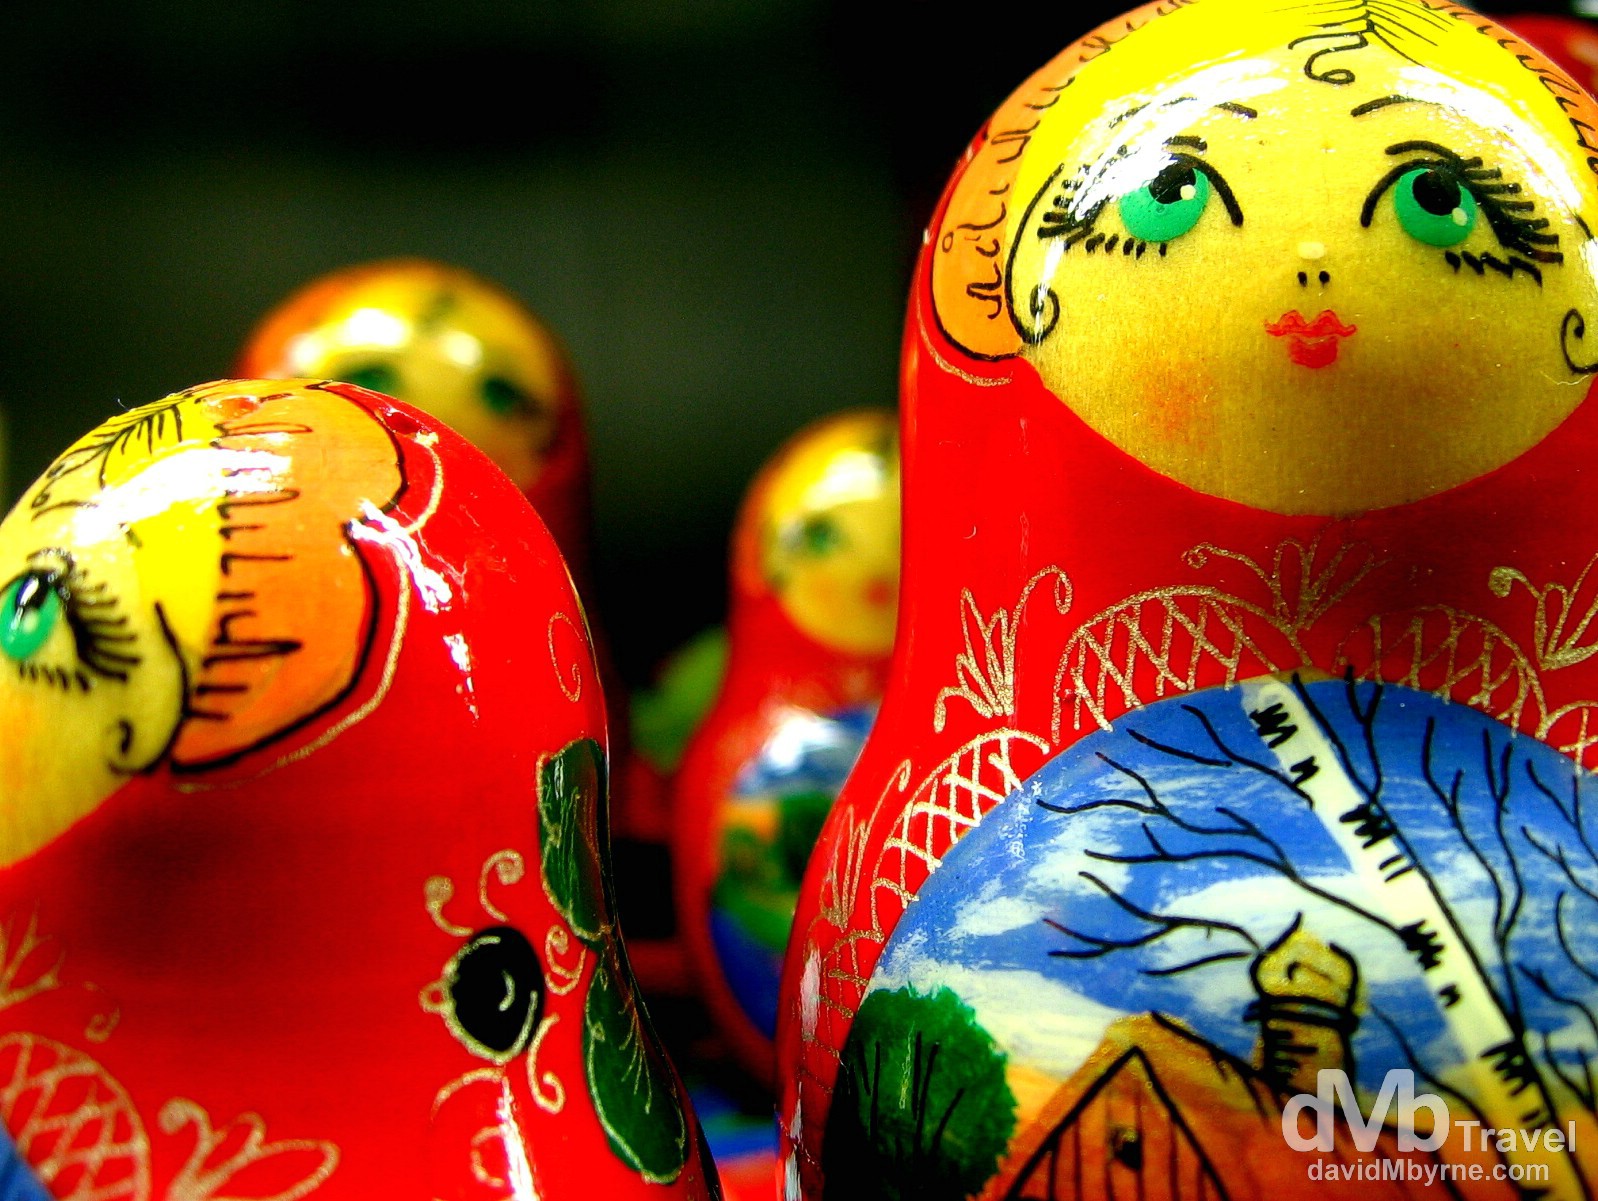 Matryoshka dolls in the gift shop of the Peter & Paul Fortress, St. Petersburg, Russia. February 28, 2006.